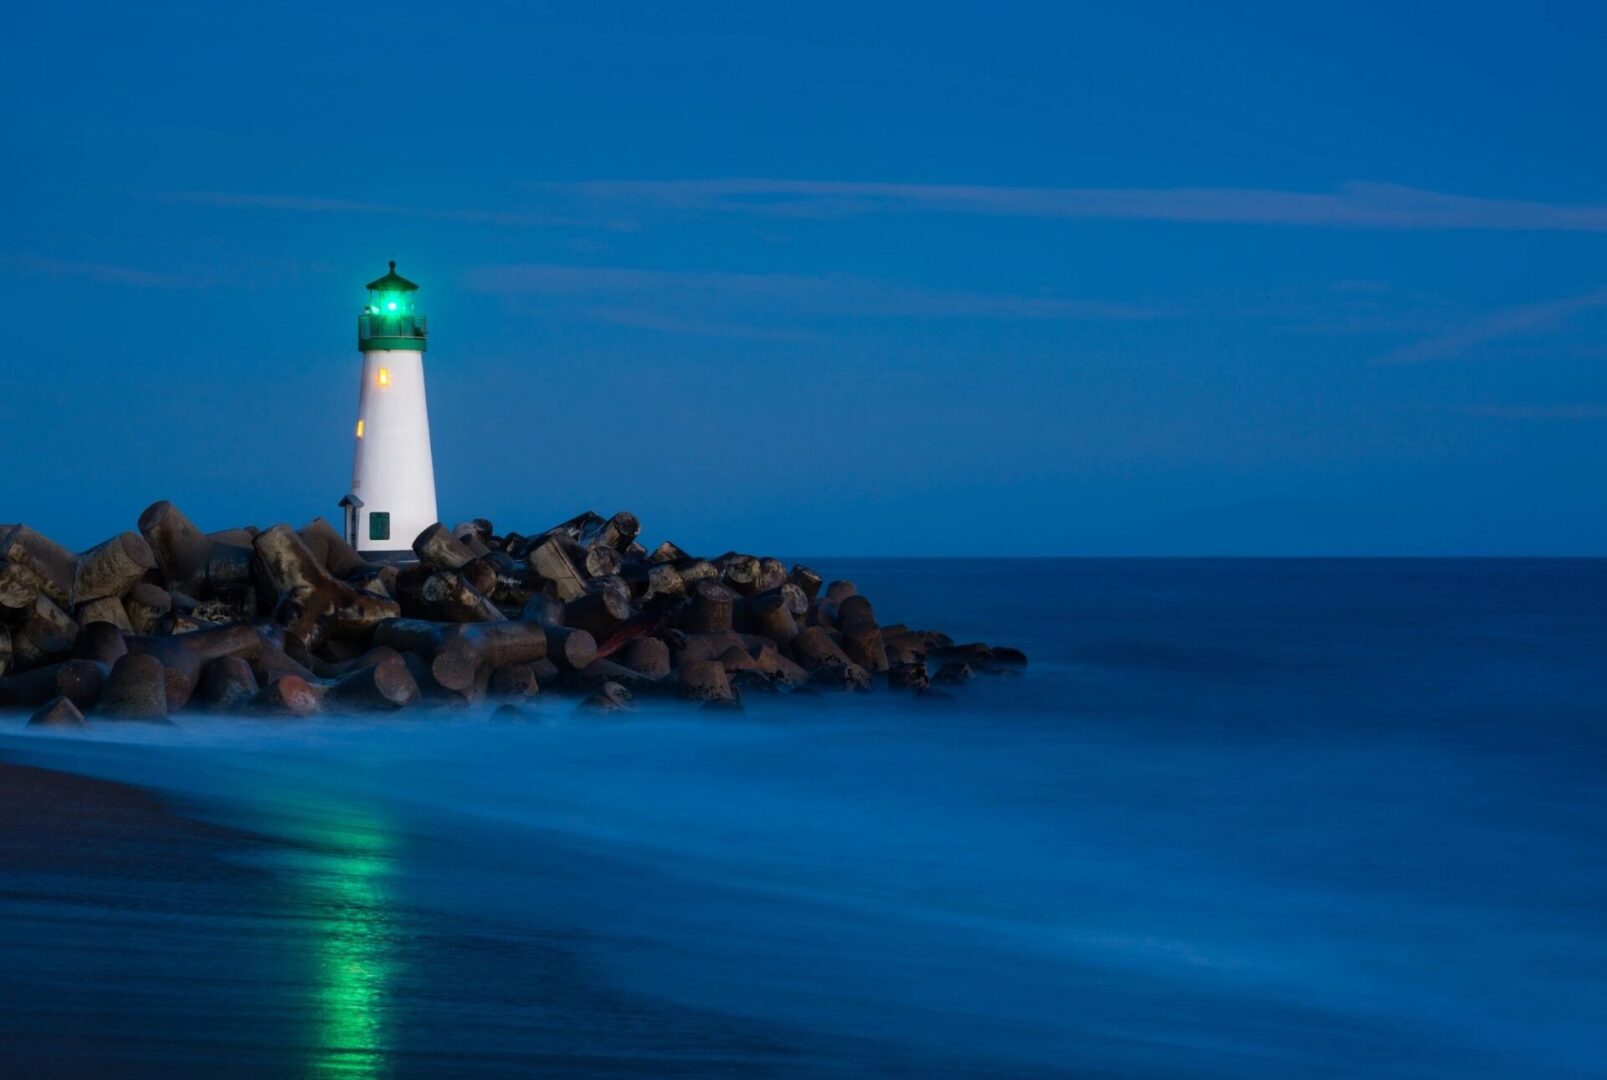 A lighthouse on the beach at night.